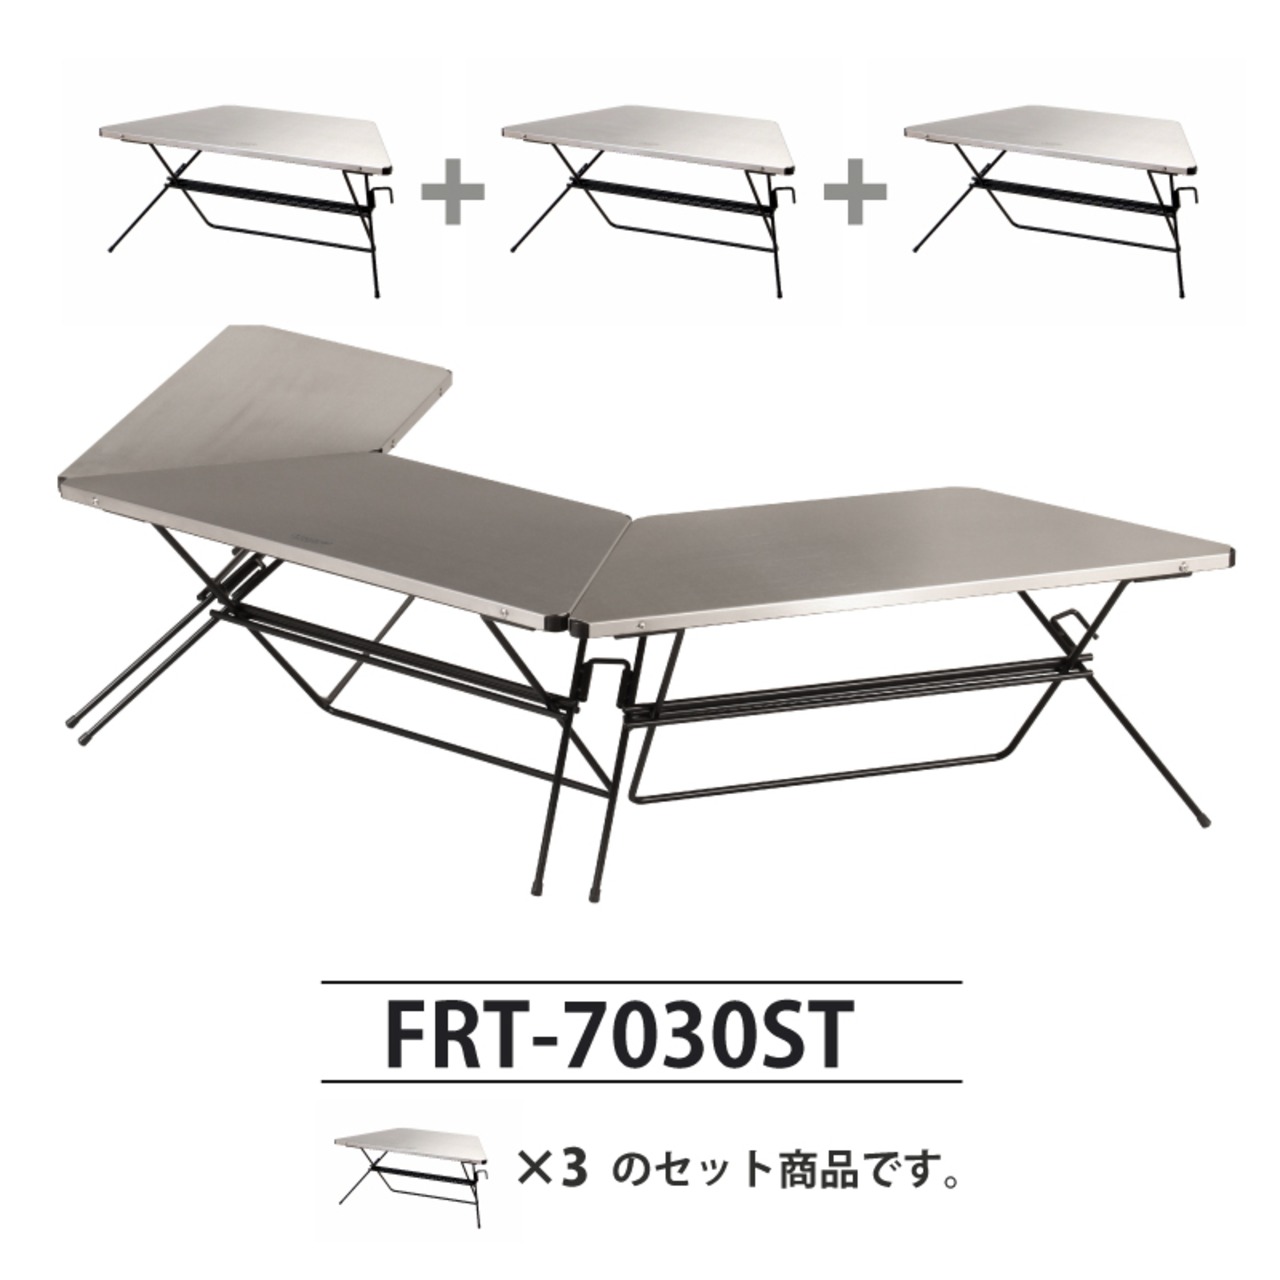 HangOut (ハングアウト) FRT Arch Table (Stainless Top) アーチ テーブル ステンレス トップ